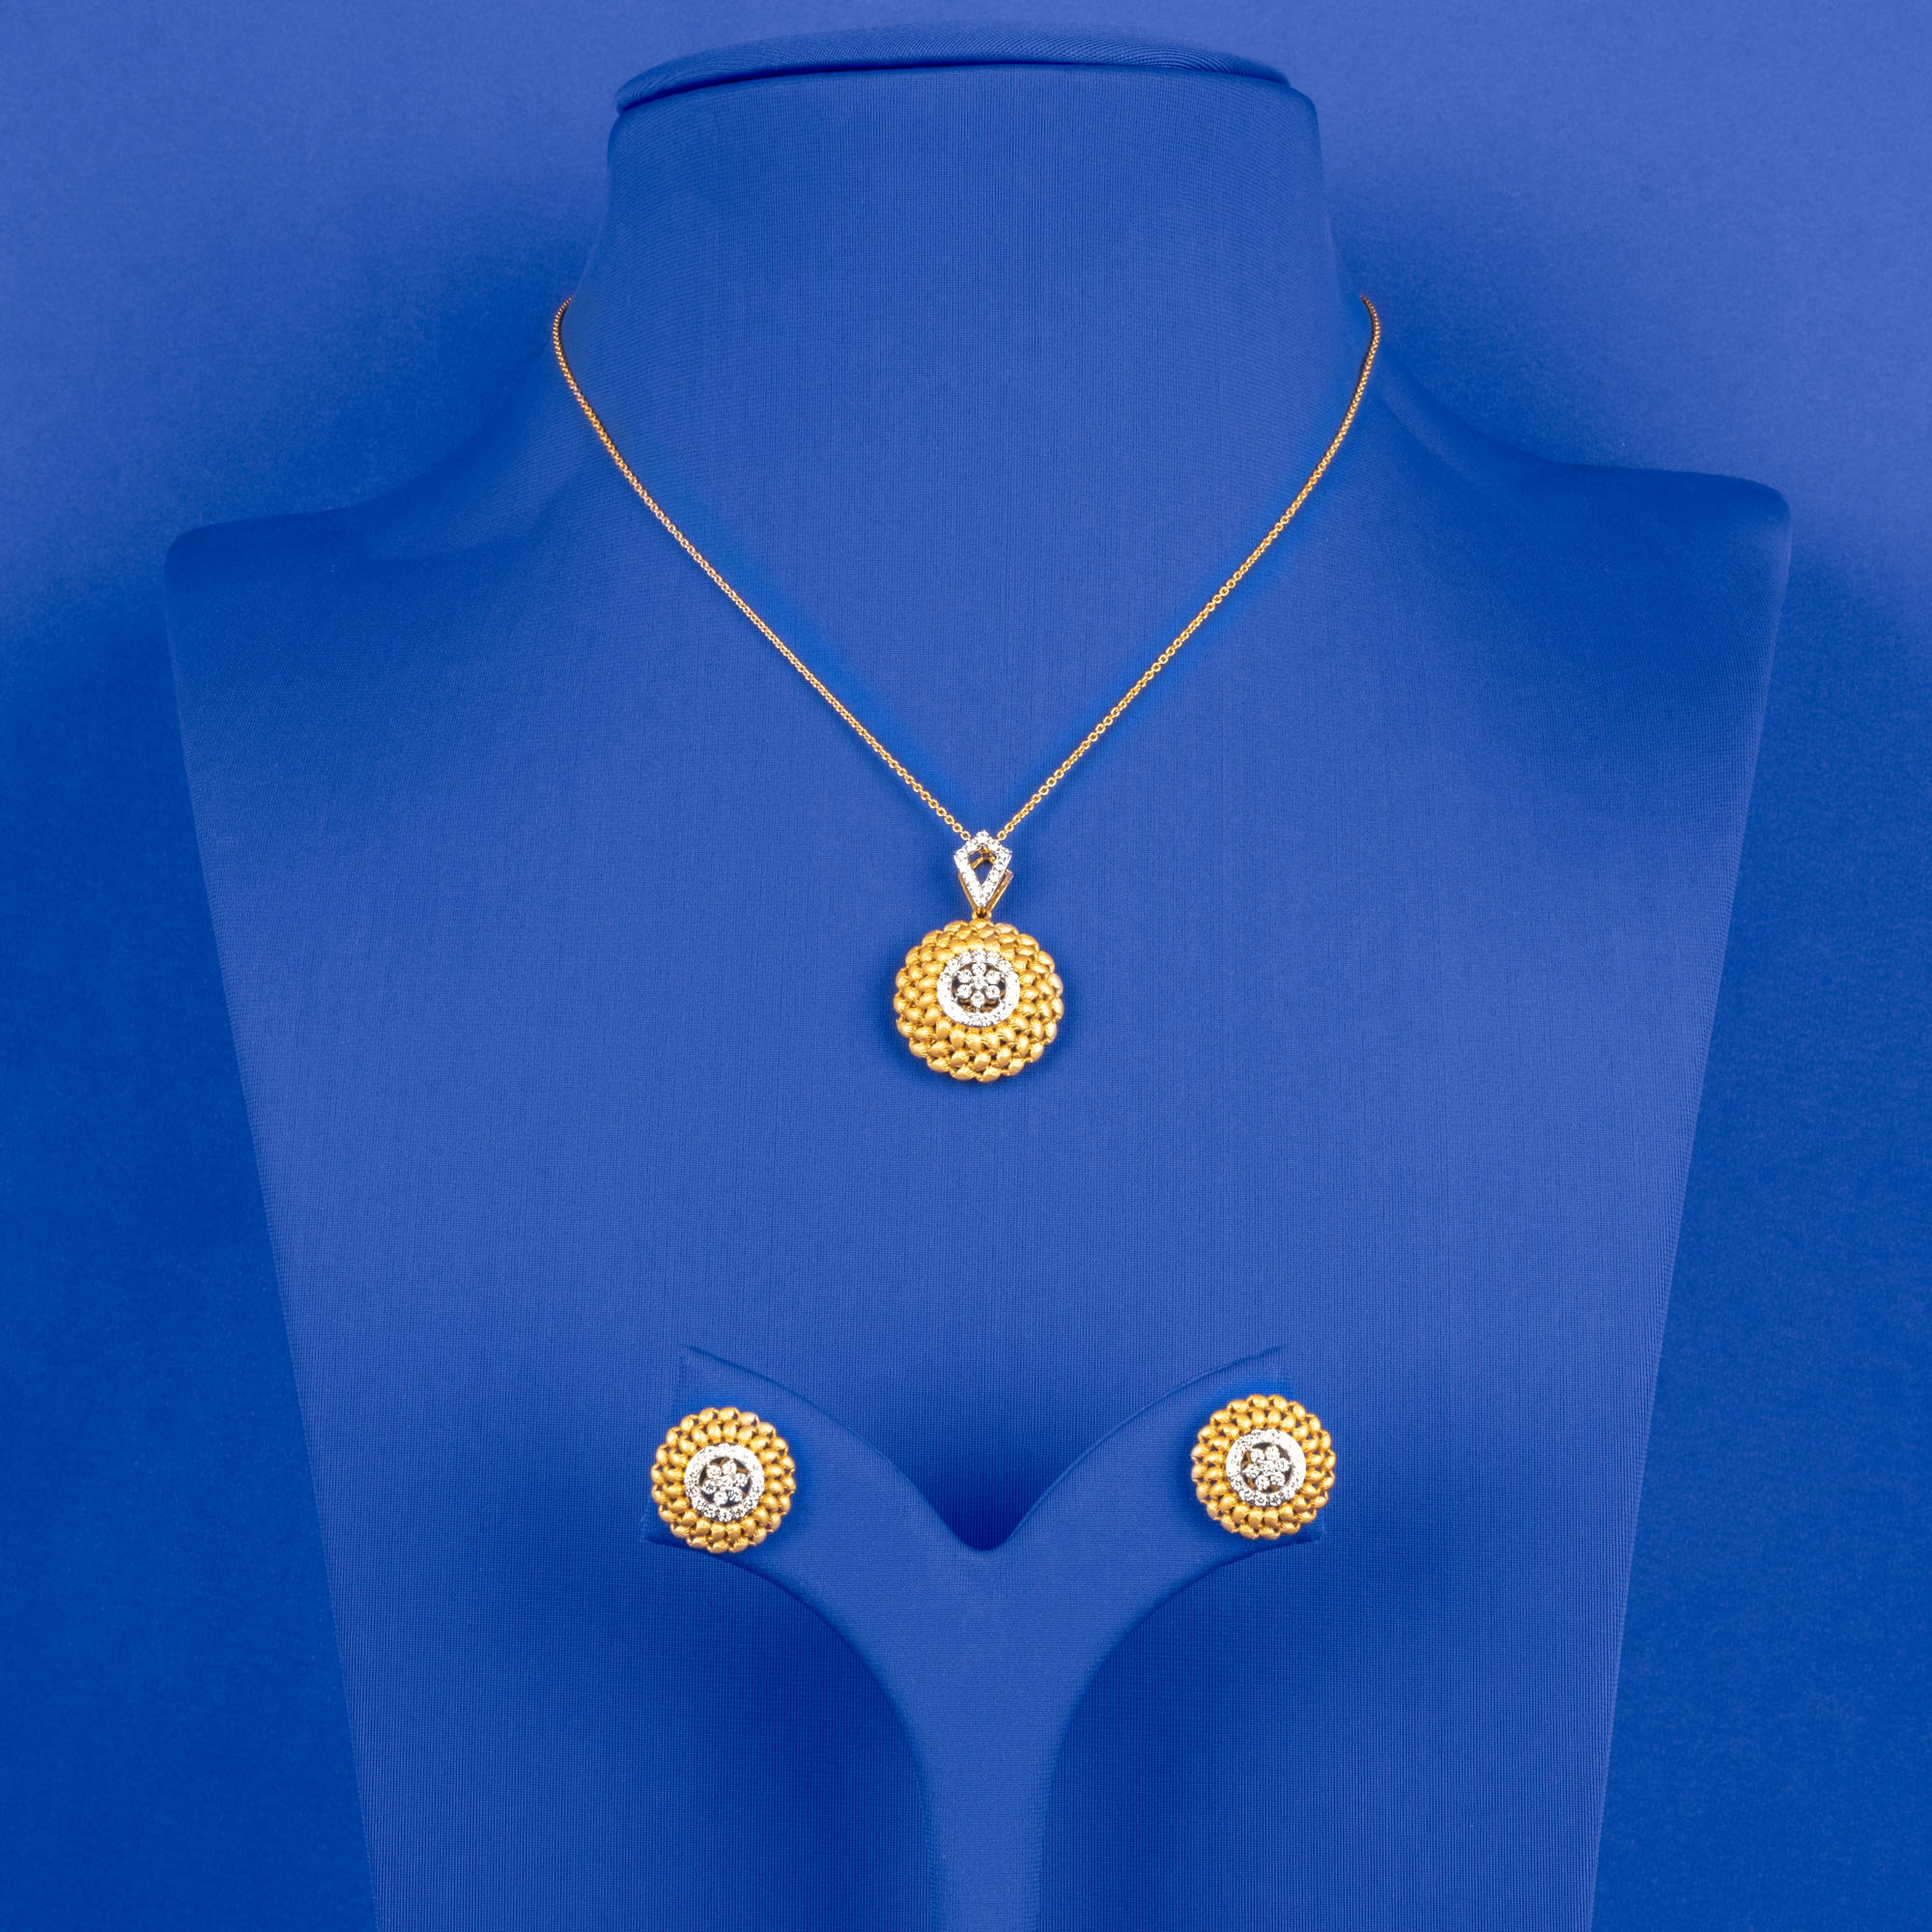 Twilight Treasures: 18K Yellow Gold Diamond Pendant and Earrings Set (Chain not included)